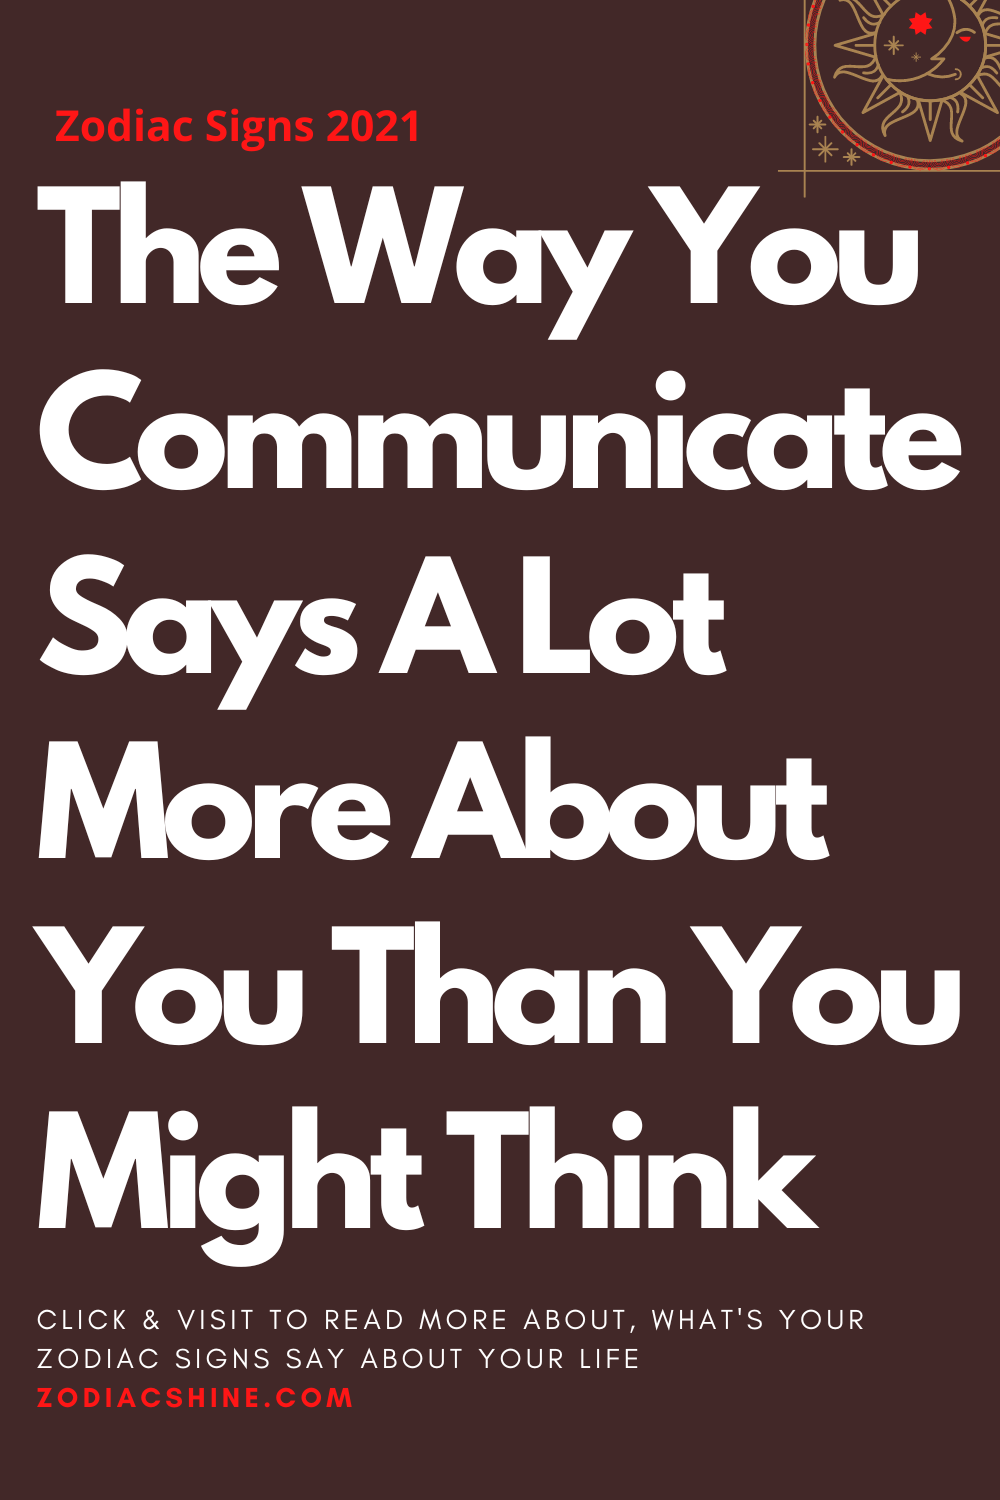 The Way You Communicate Says A Lot More About You Than You Might Think